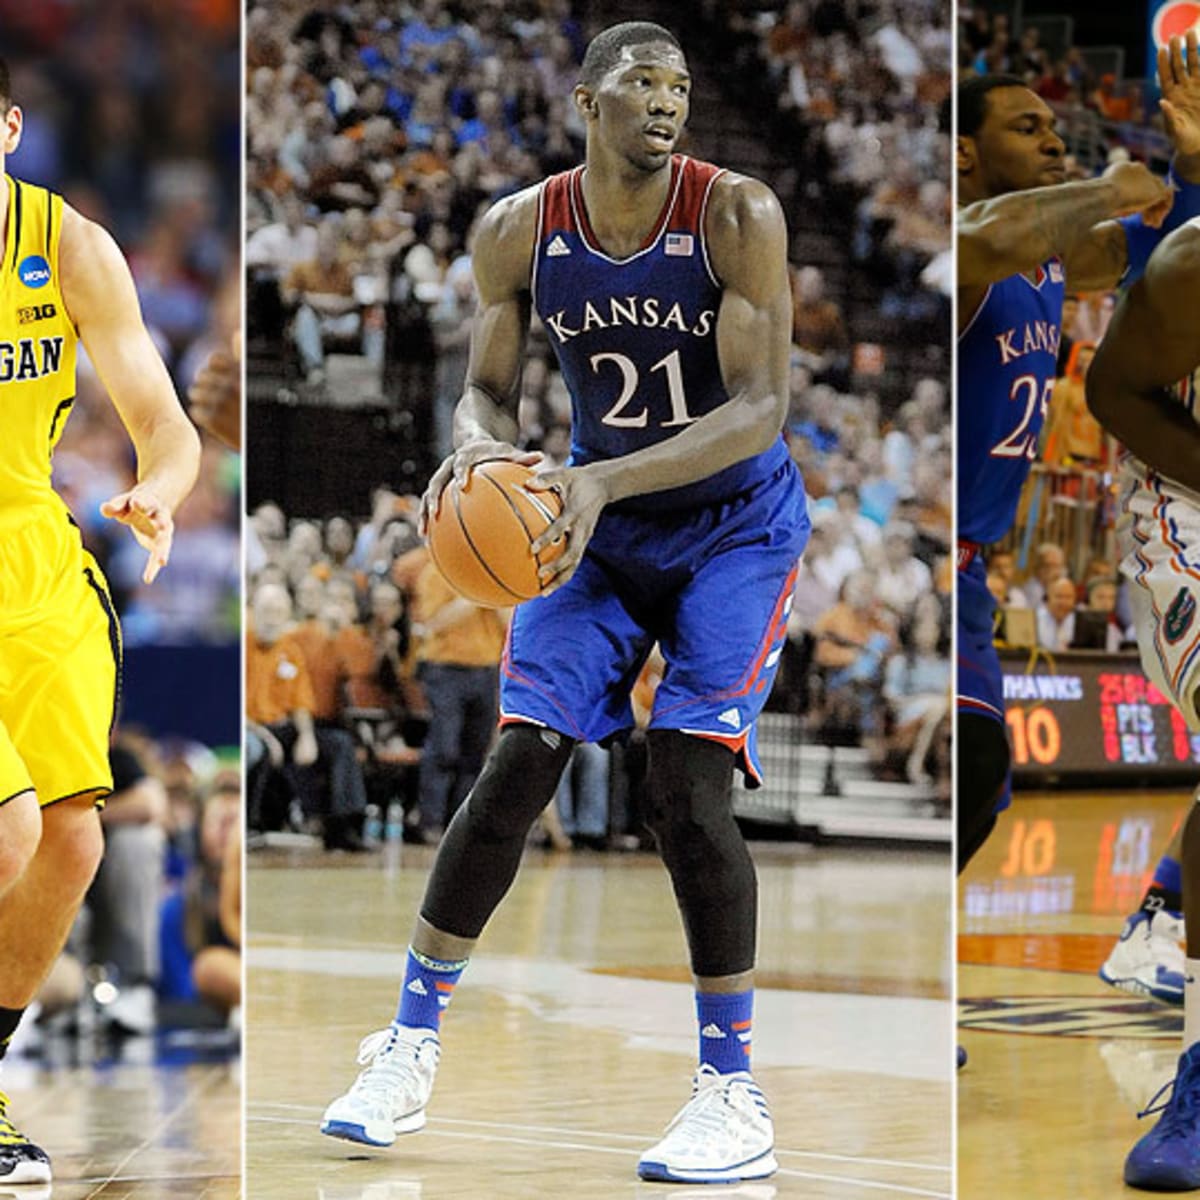 NBA Draft Caucus: When should Joel Embiid get picked?